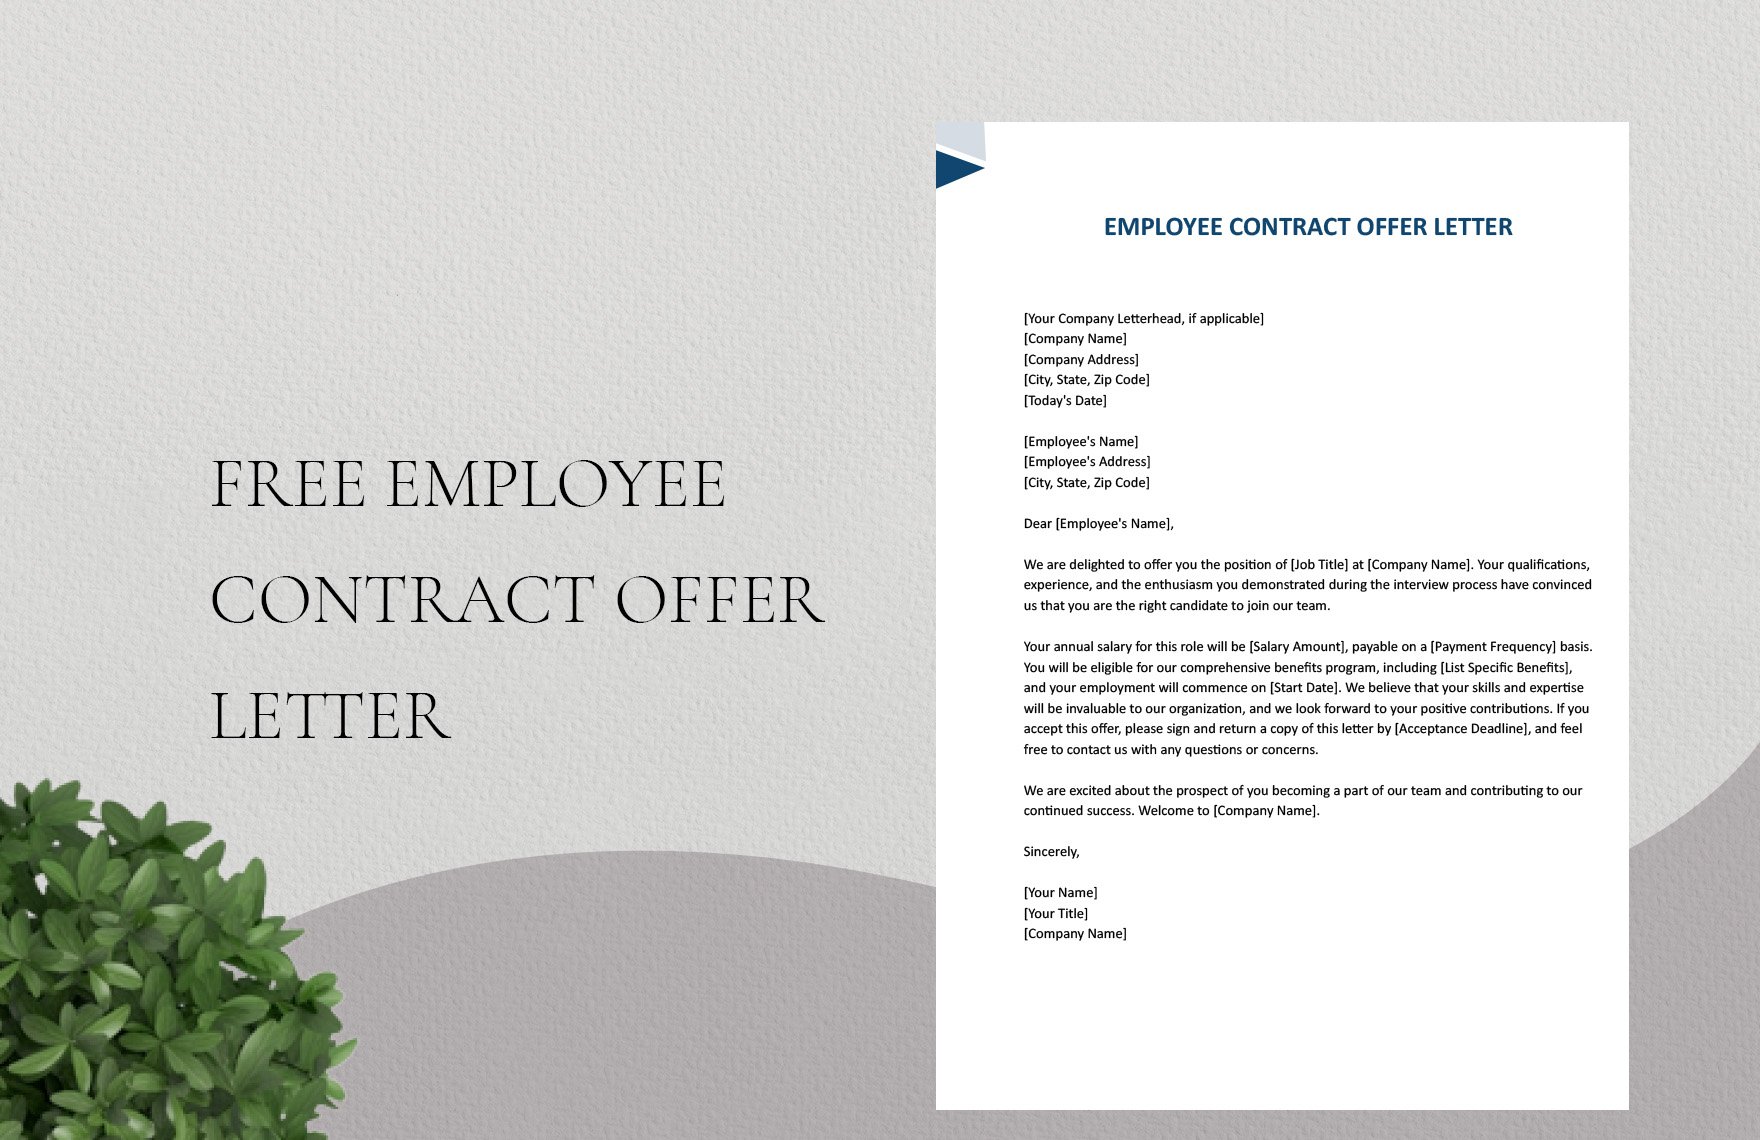 Employee Contract Offer Letter